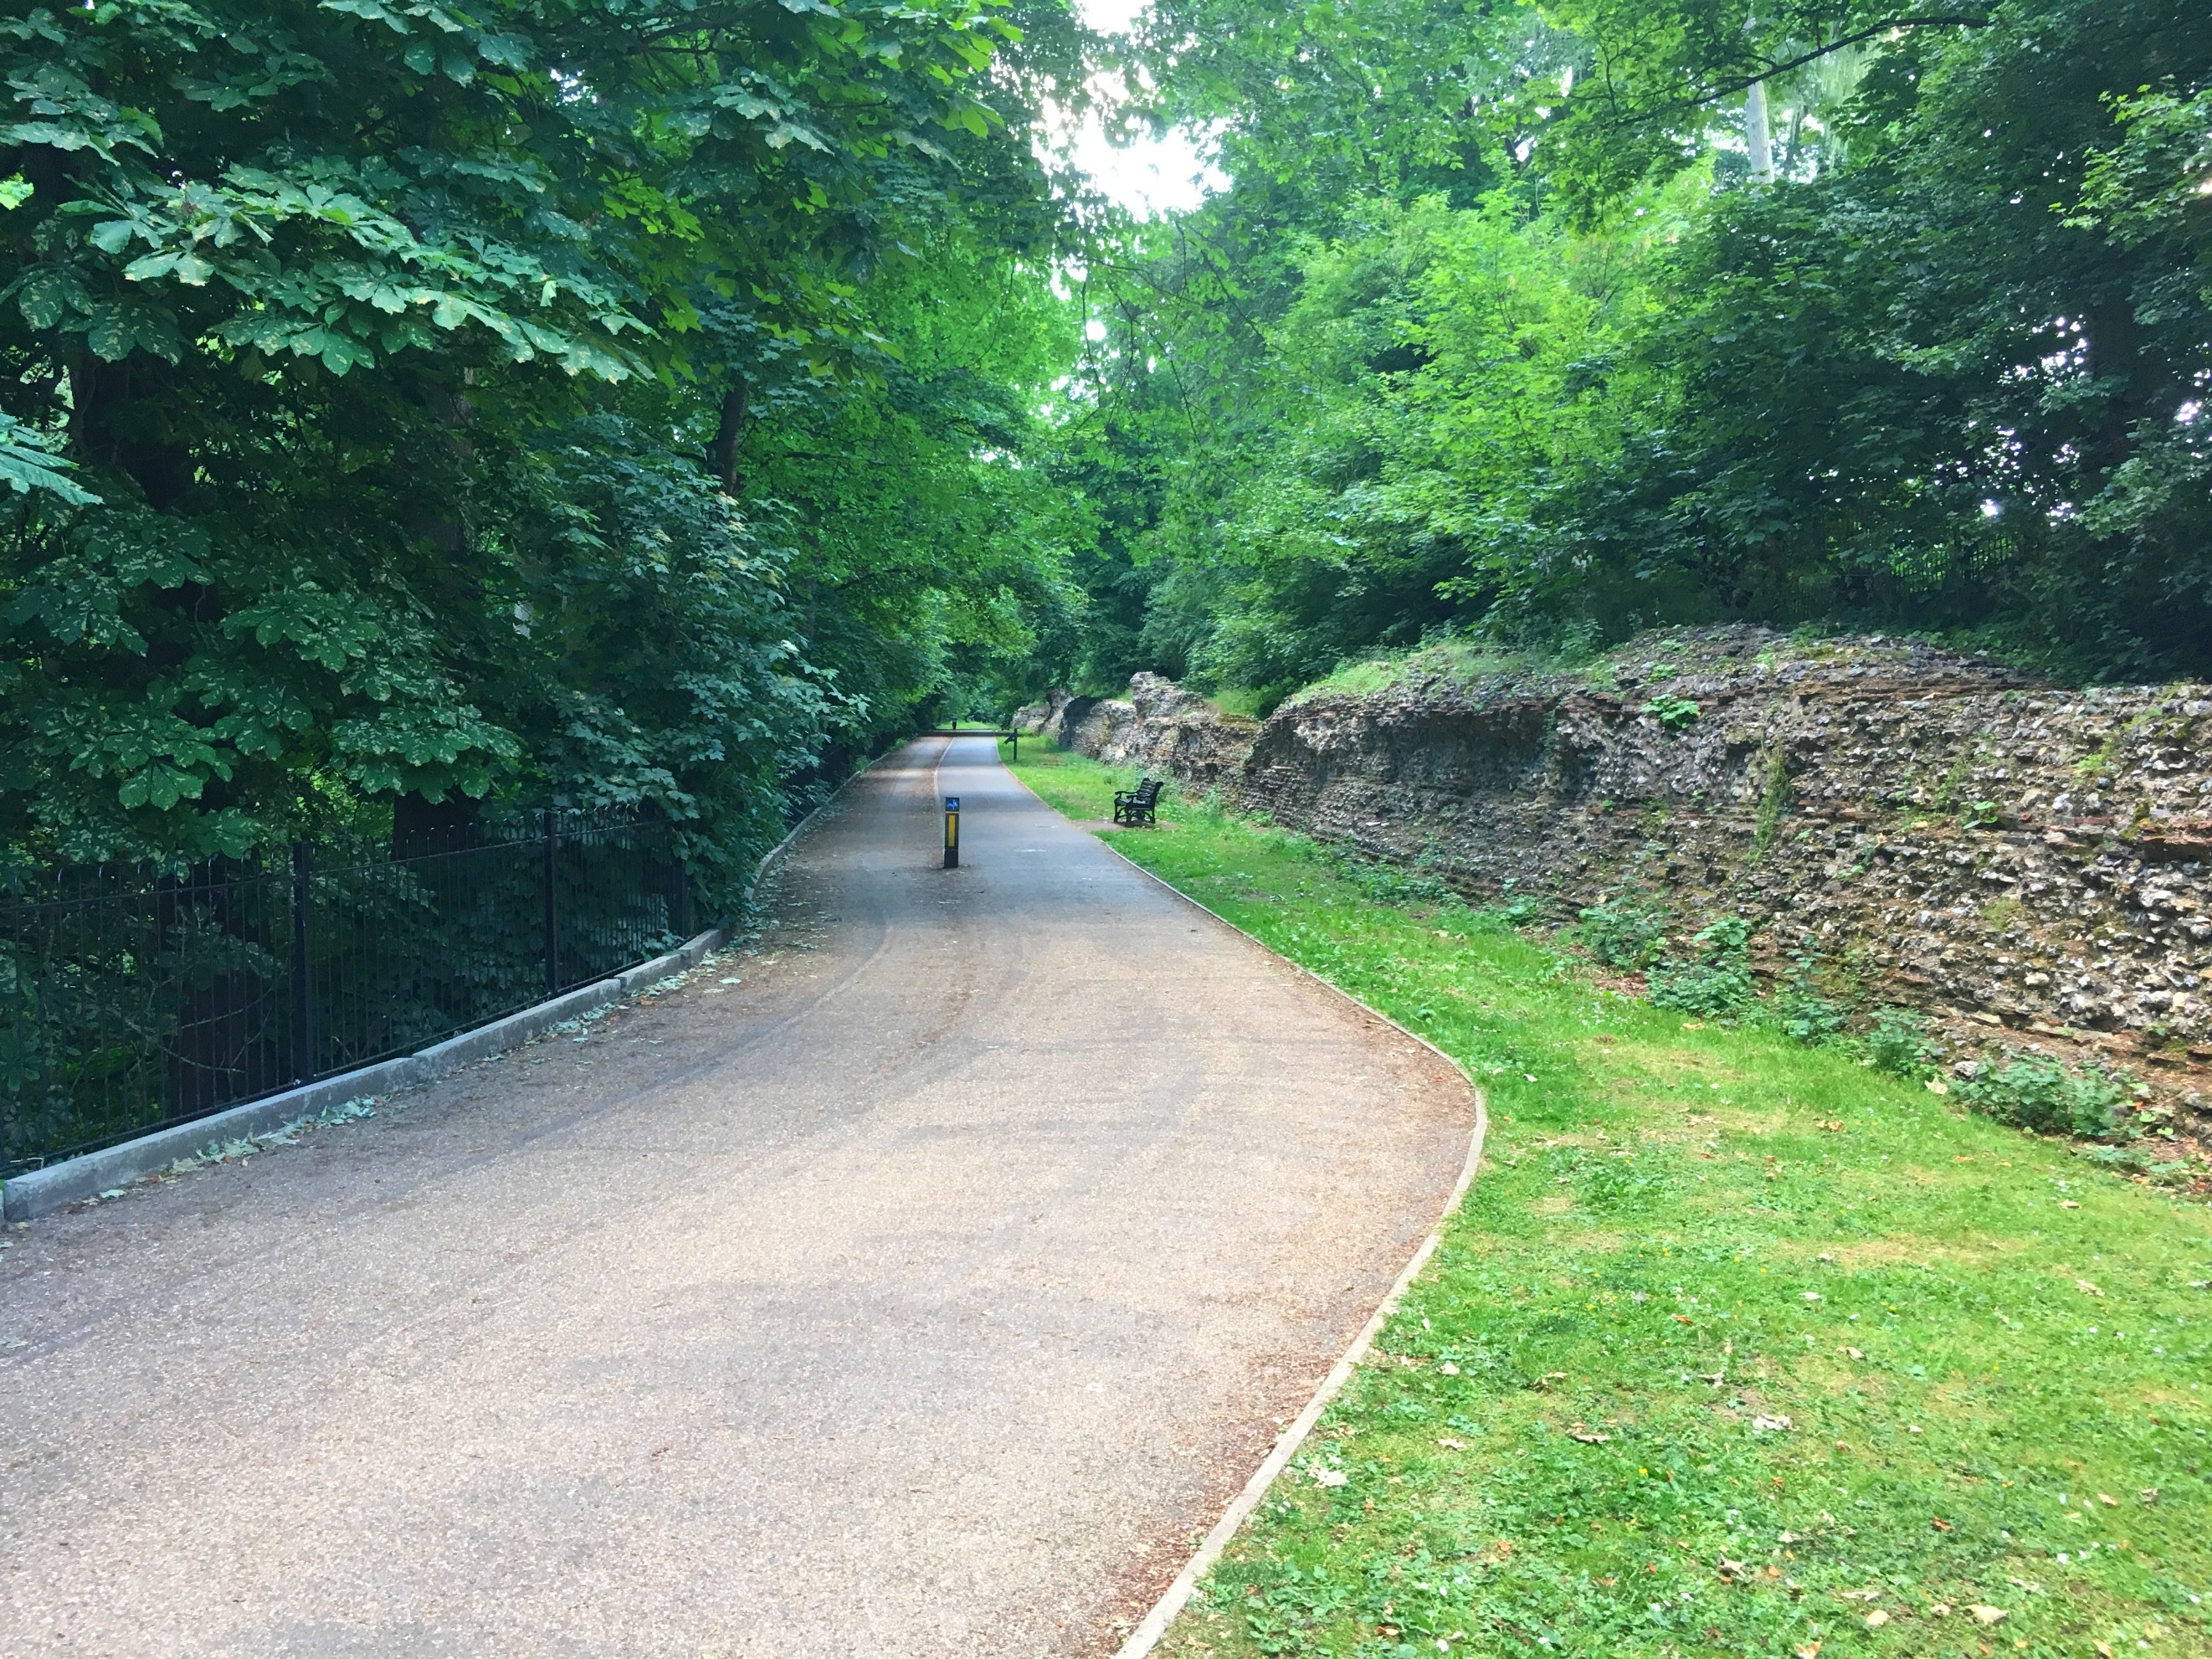 #cyclingadventures, InnTravel, slow holidays, cycling, cycle route, Verulamium Park, St Albans, Hertfordshire, historical, Romans, history, The London Gate, active lifestyle, wellbeing, outdoors, get outside